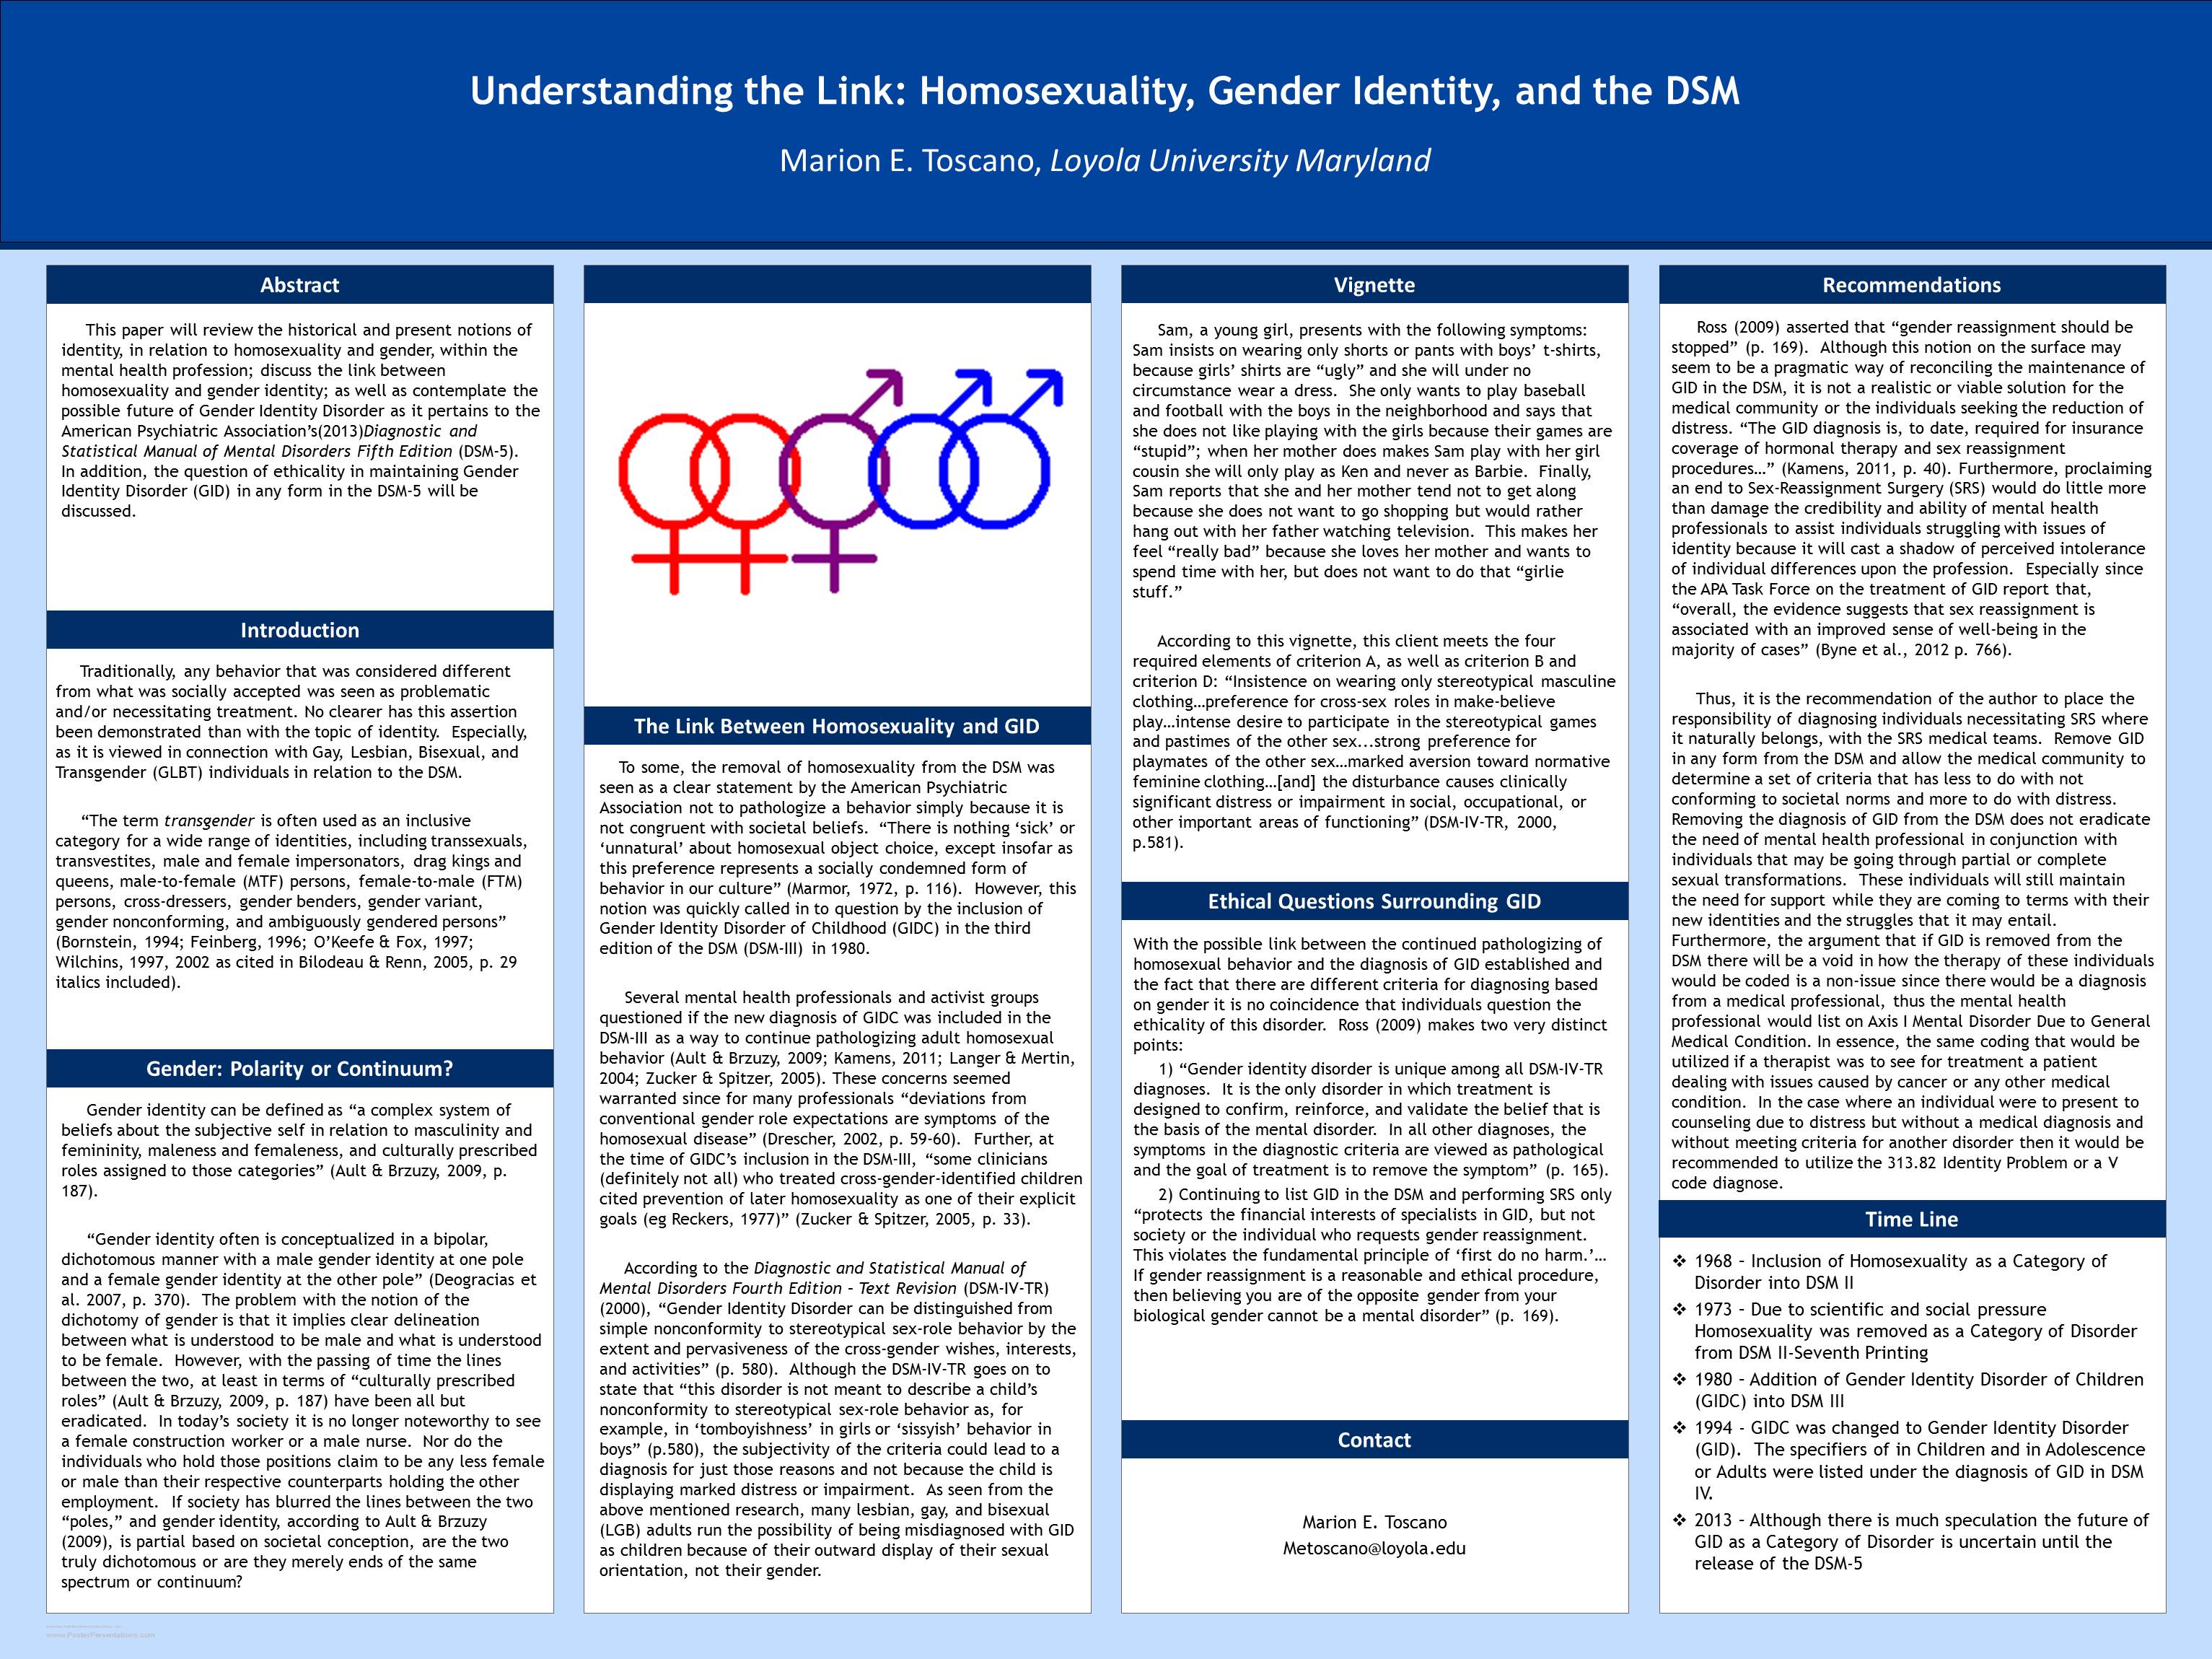 Enlarged poster image: Understanding the Link: Homosexuality, Gender Identity and the DSM